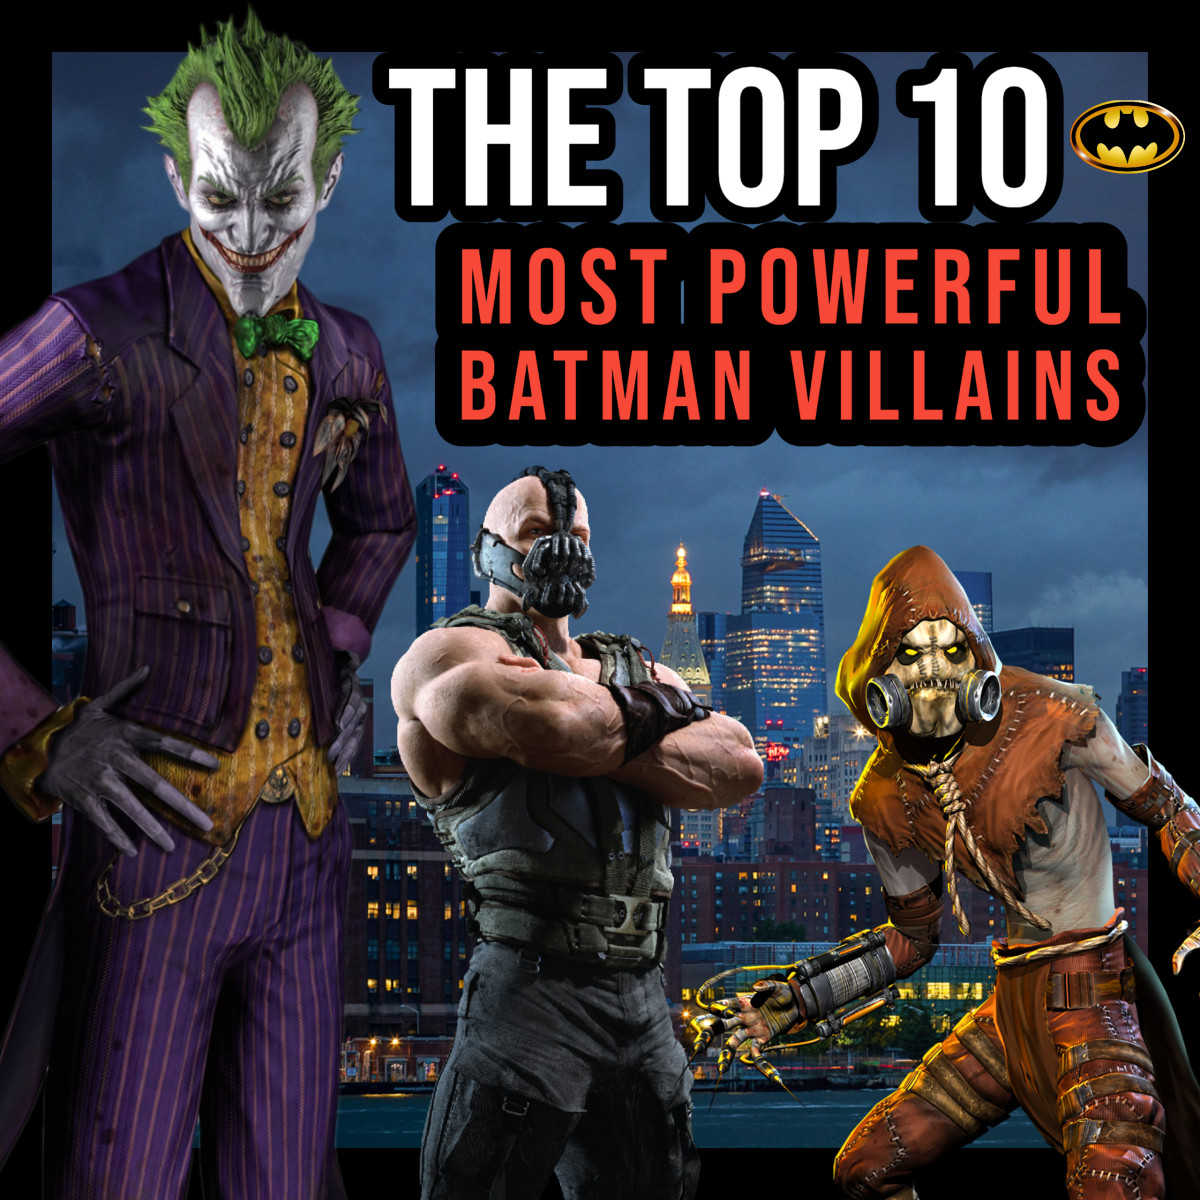 From Two-Face to the Batman Who Laughs, this article ranks the 10 most powerful Batman villains of all time!